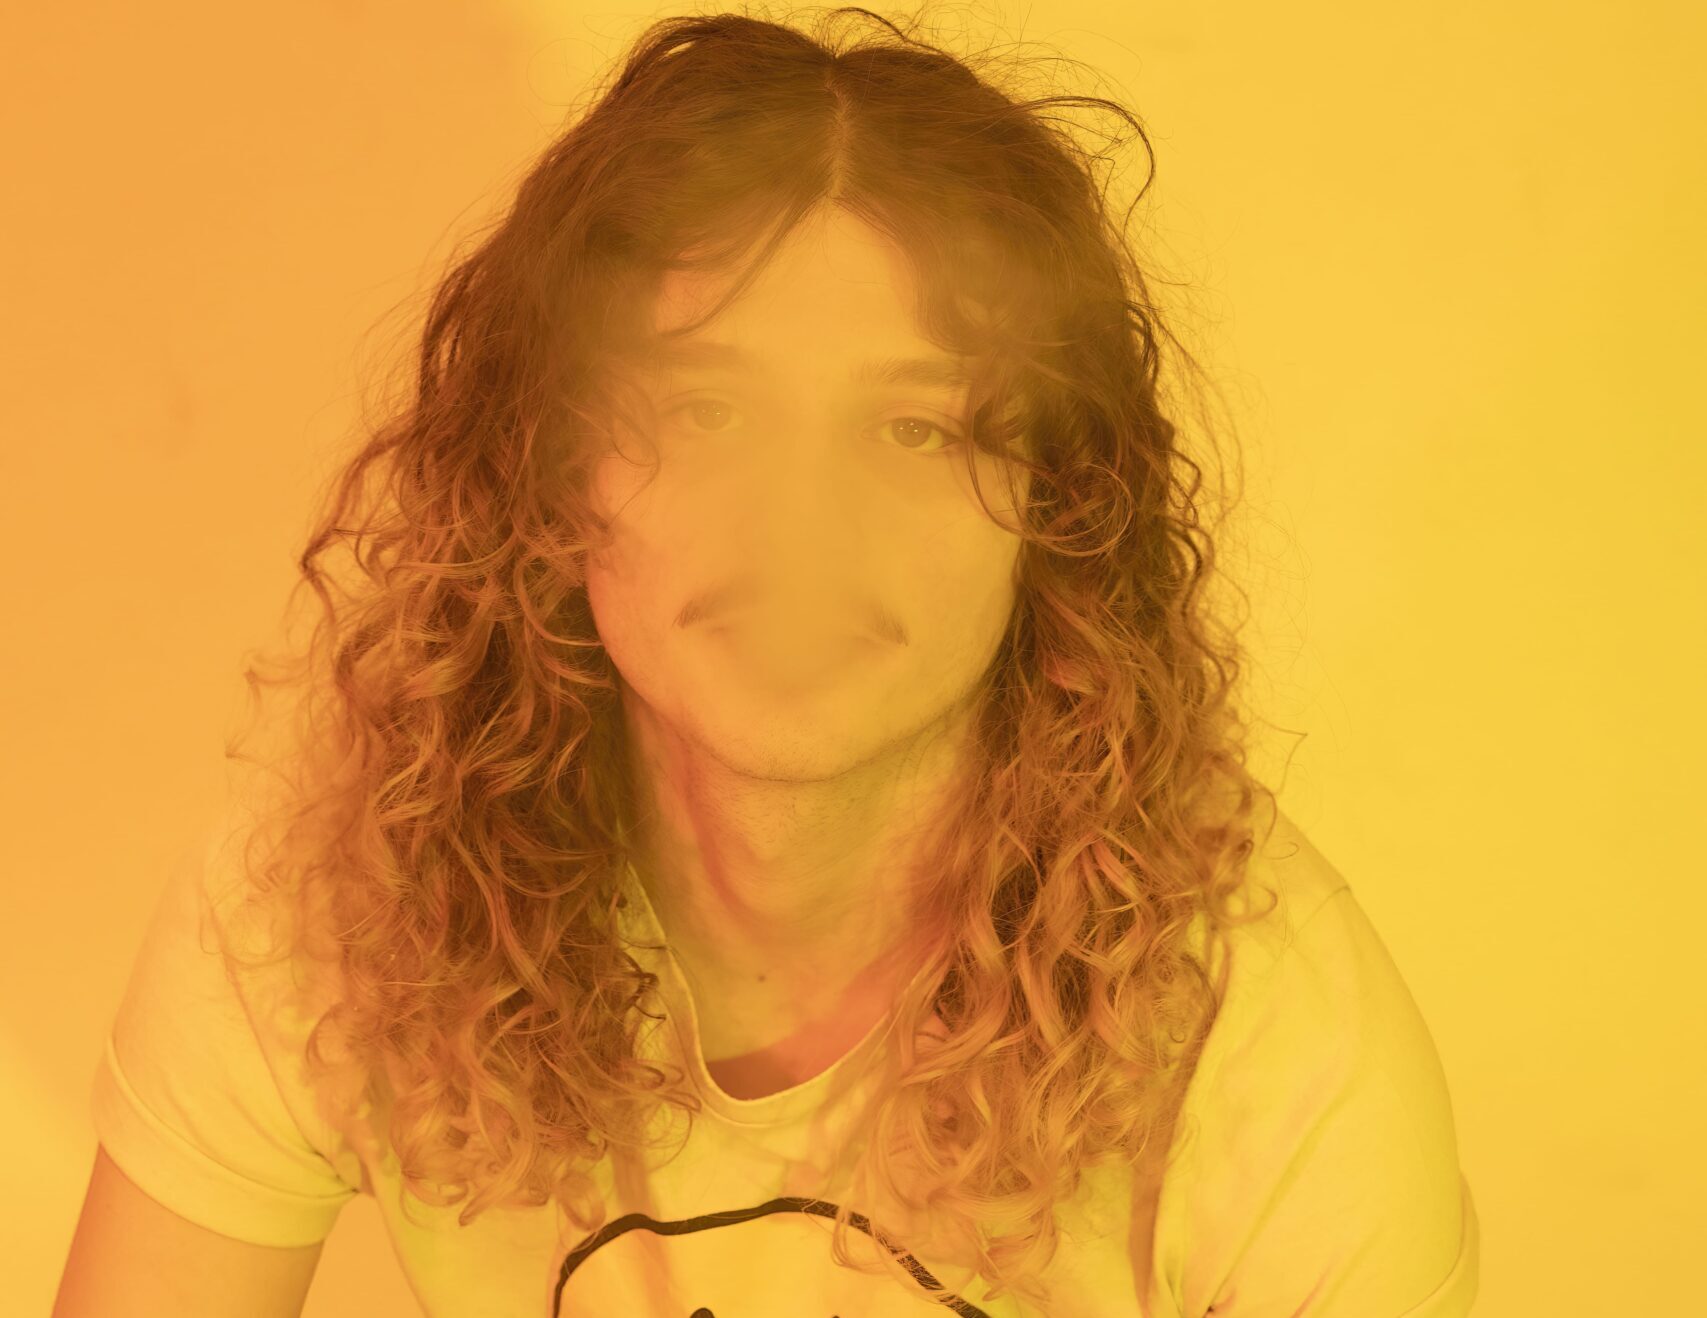 A white man with a moustache and curly blonde-brown hair sits on the floor, wearing a white tshirt with a smiley face. The image is tinted yellow. 